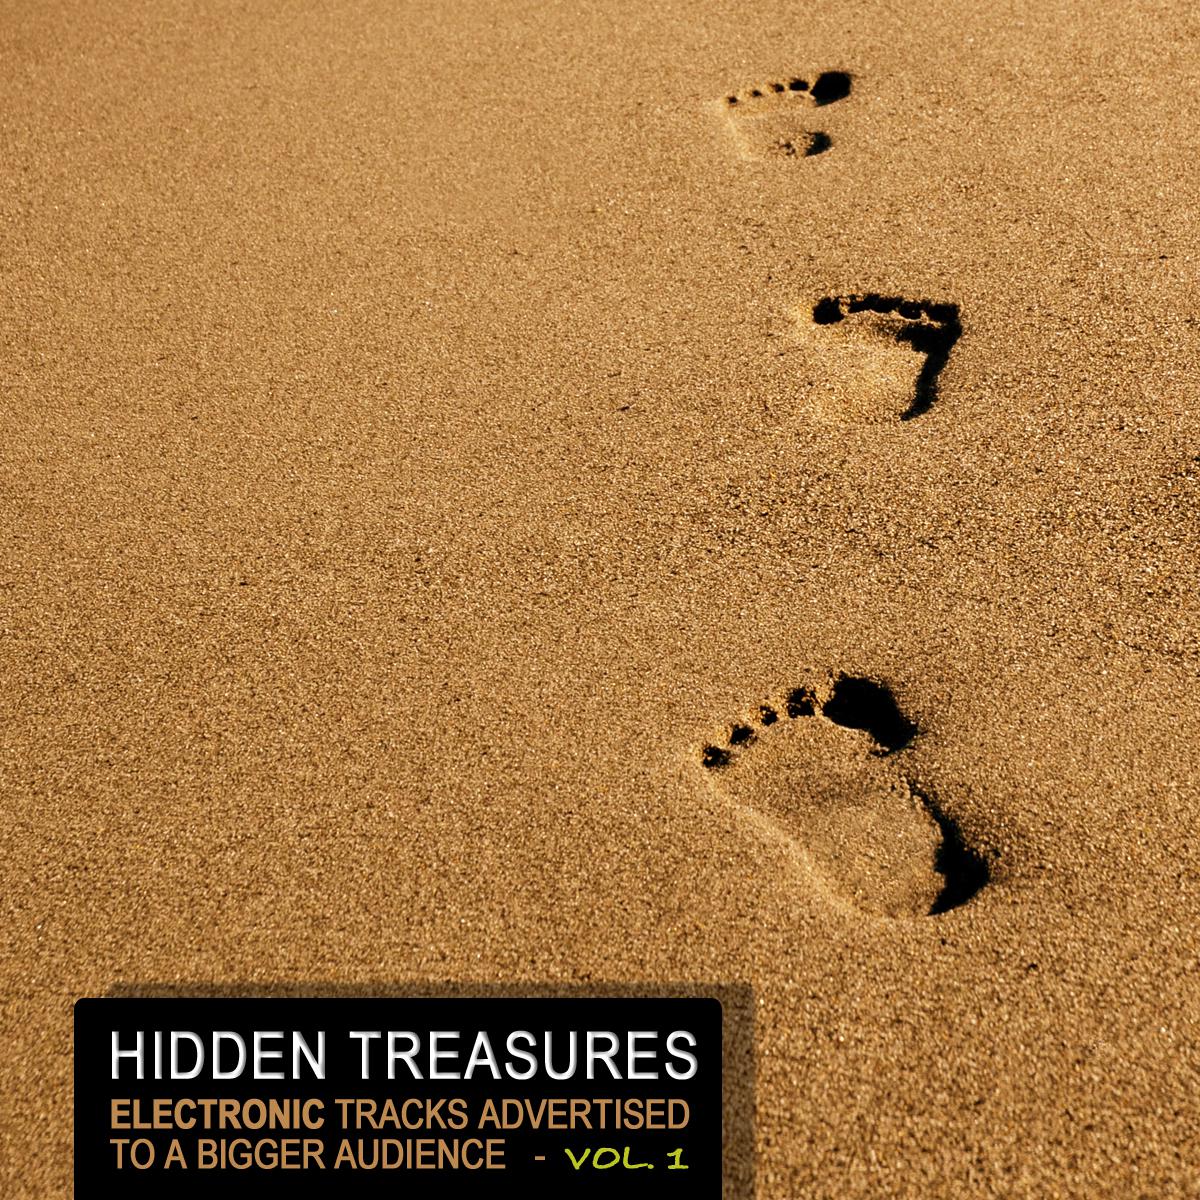 Hidden Treasures, Vol. 1 - Electronic Tracks Advertised to a Bigger Audience